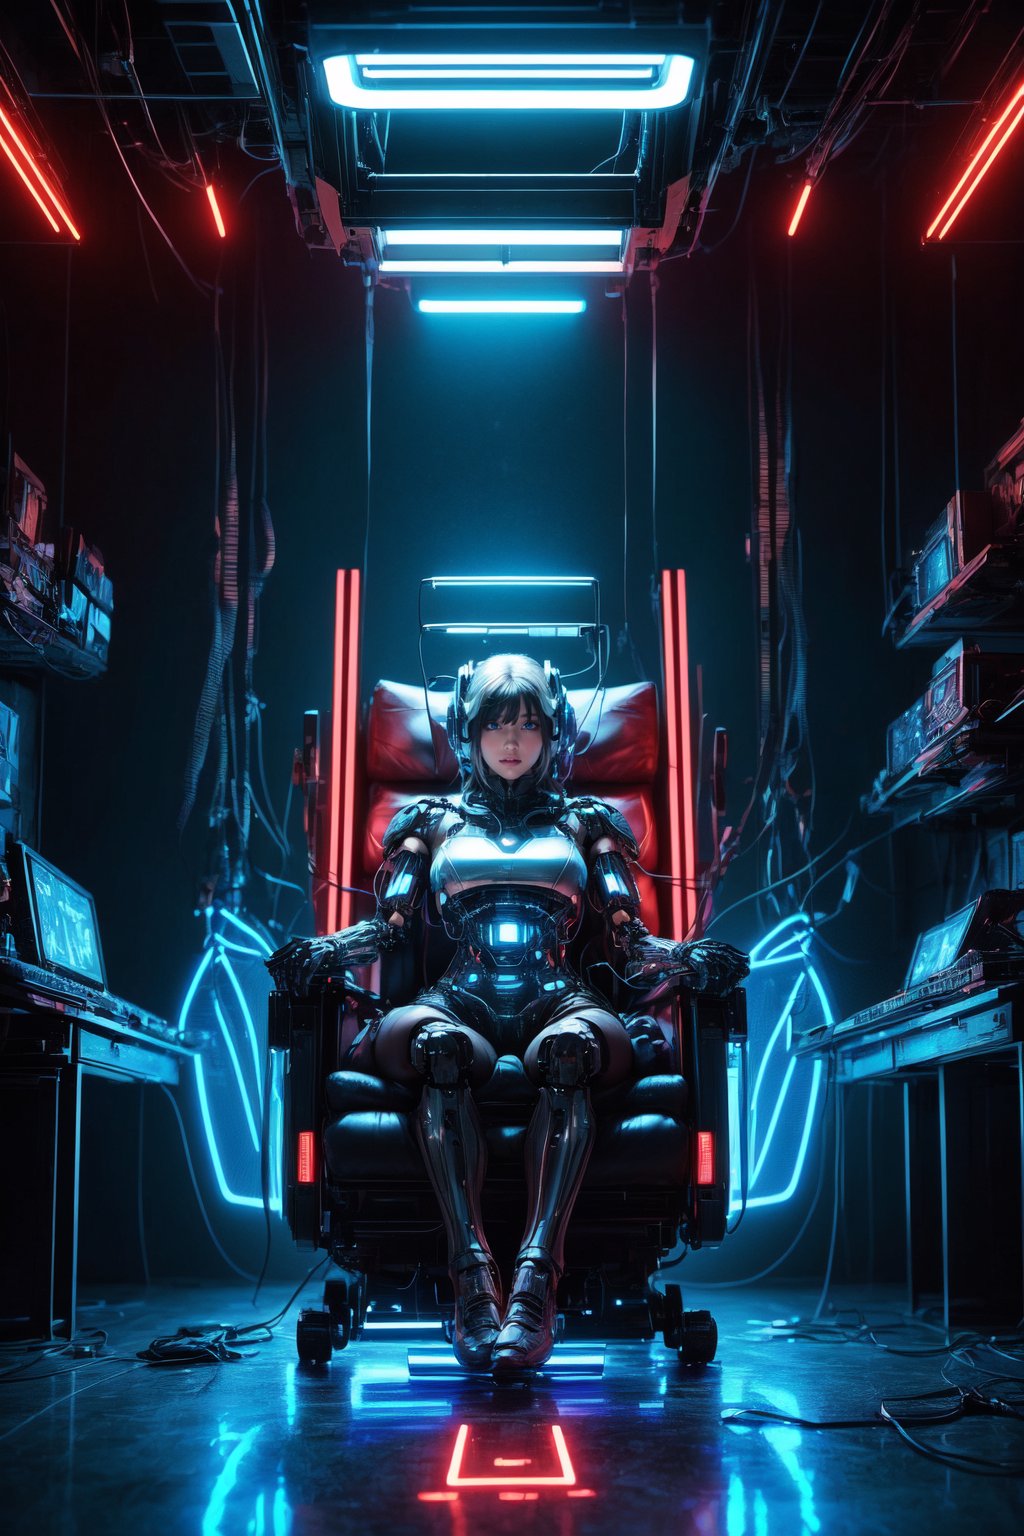 High-quality, photorealistic digital art, 64K HDR, bright-lit cyberpunk laboratory scene with a girl in mechanized armor sitting in an energy chair, surrounded by wires and futuristic instruments, symmetric composition, (Cyberpunk:1.4), (Mecha-armored girl:1.3), (energy chair:1.2), by FuturEvoLab, advanced technology, metallic textures, contrasting neon lighting, dynamic ambiance, futuristic.